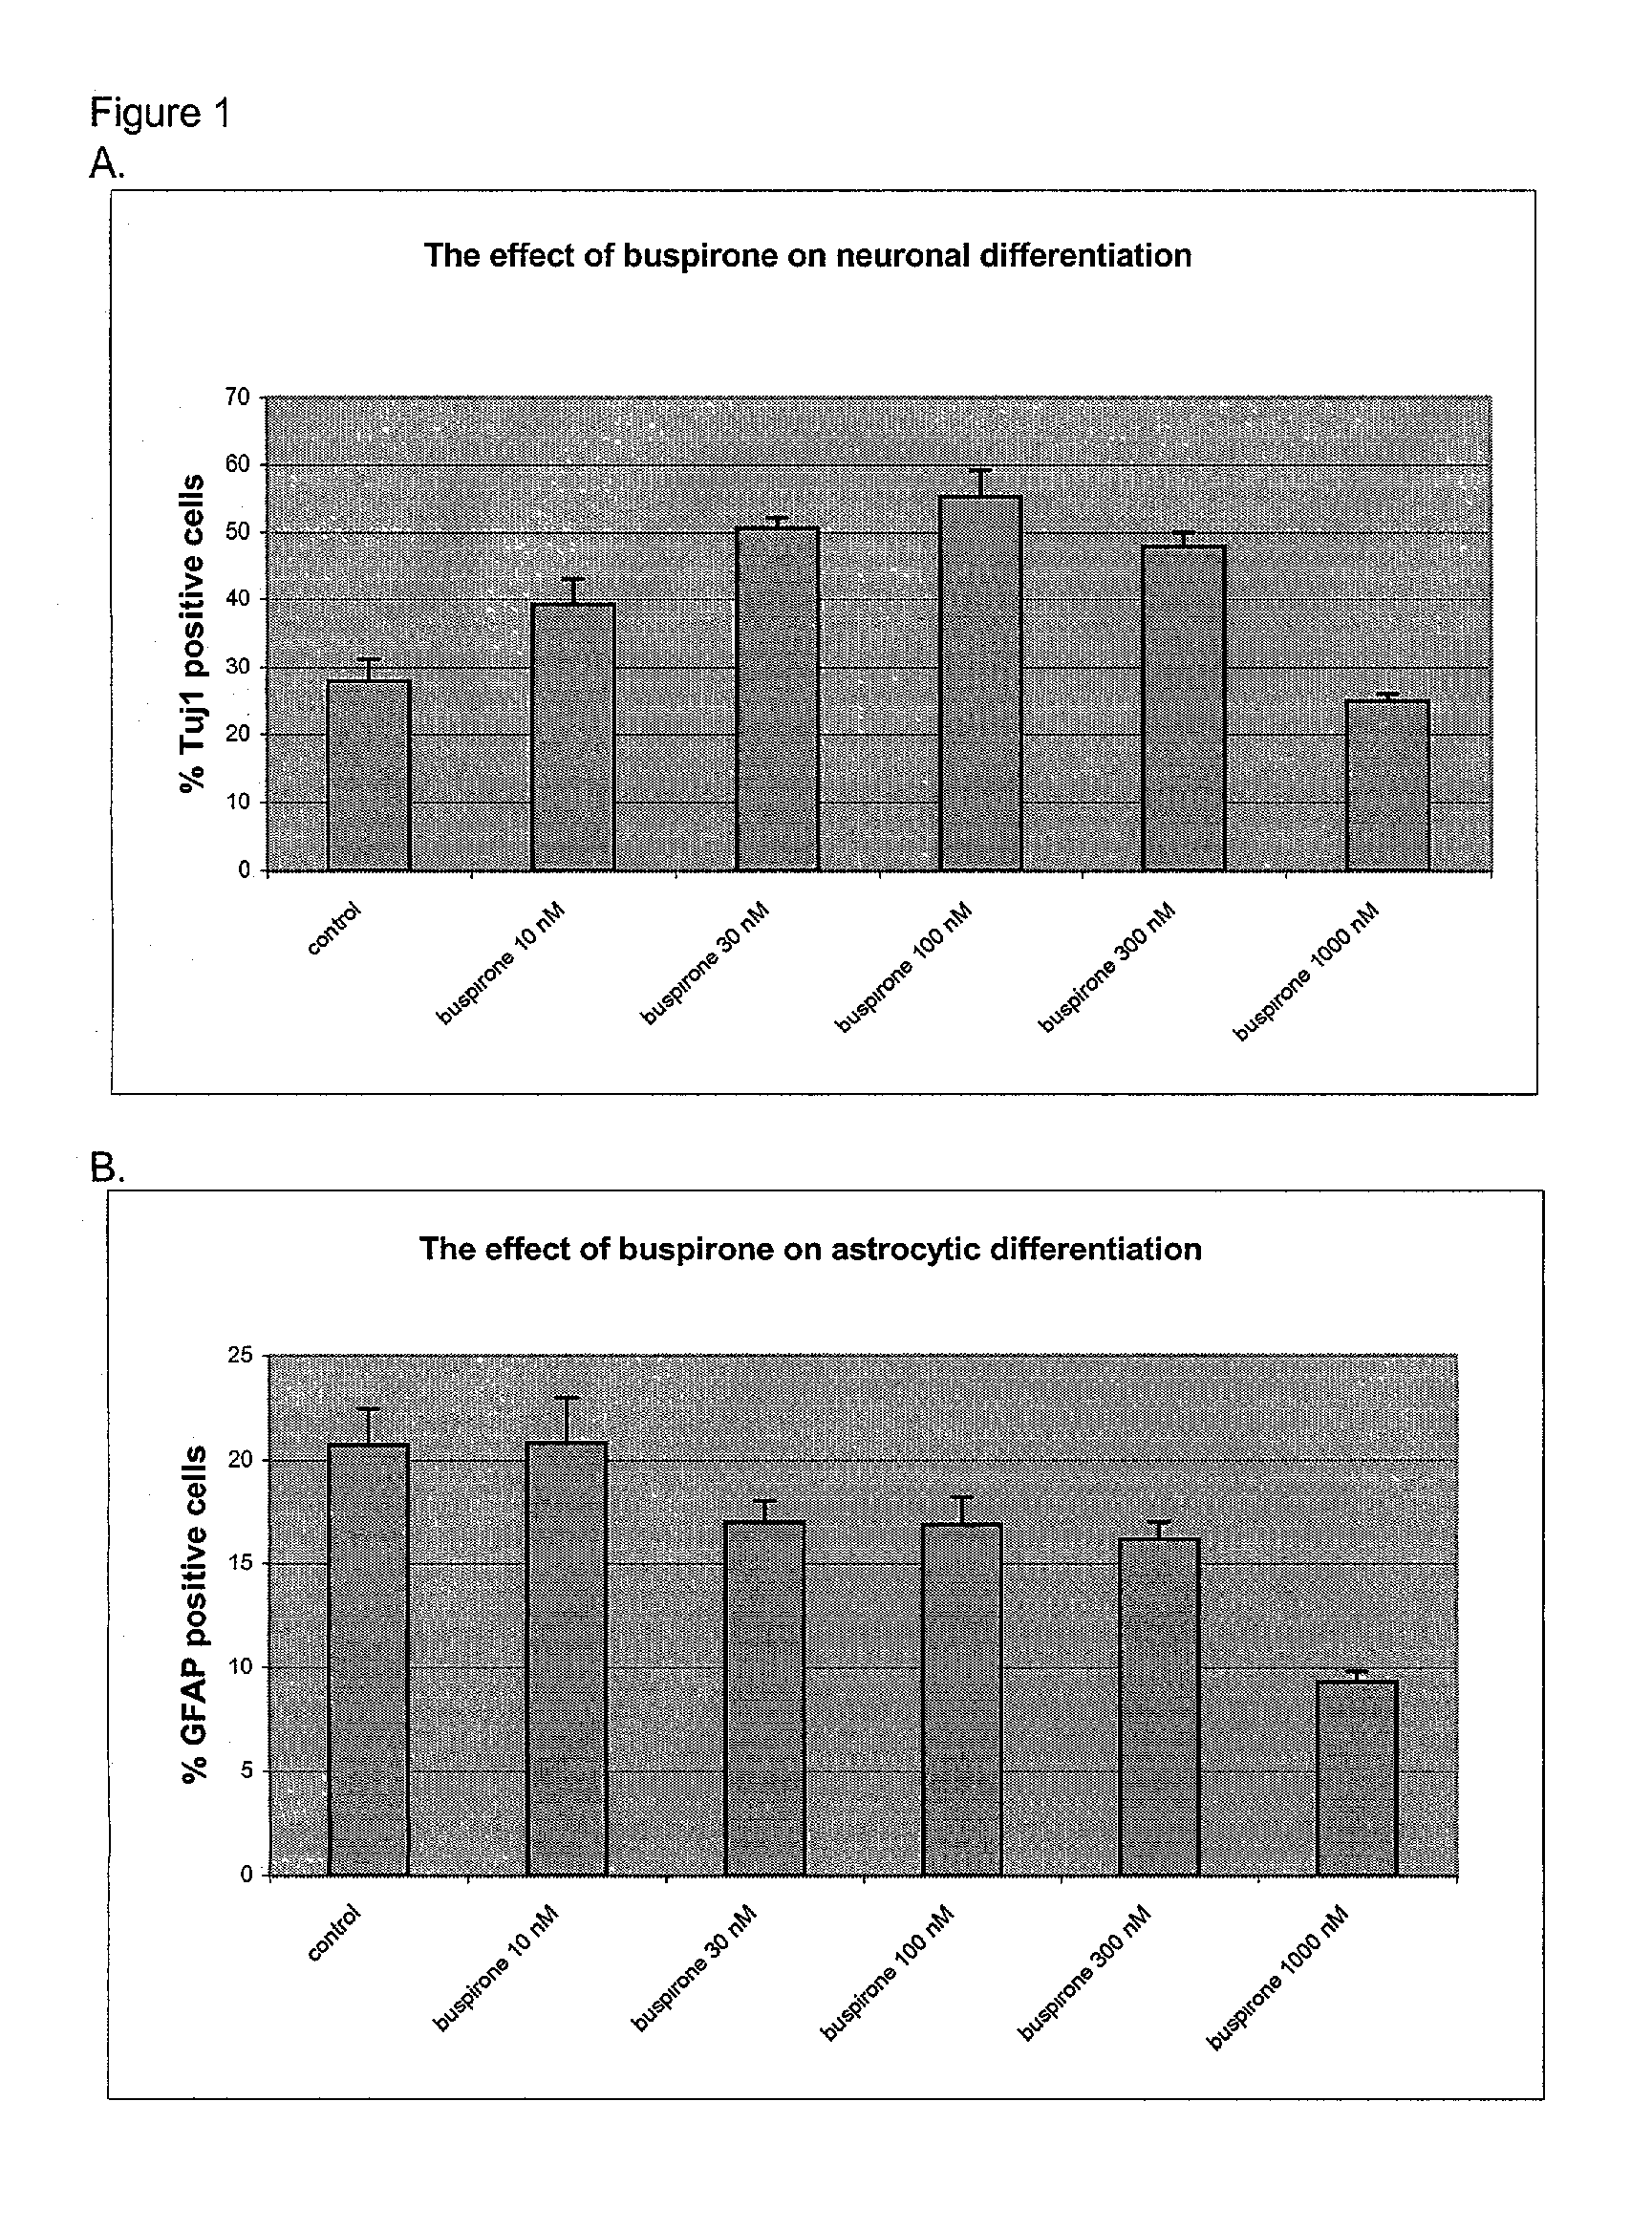 Method for neural stem cell differentiation using 5HT-1A agonists